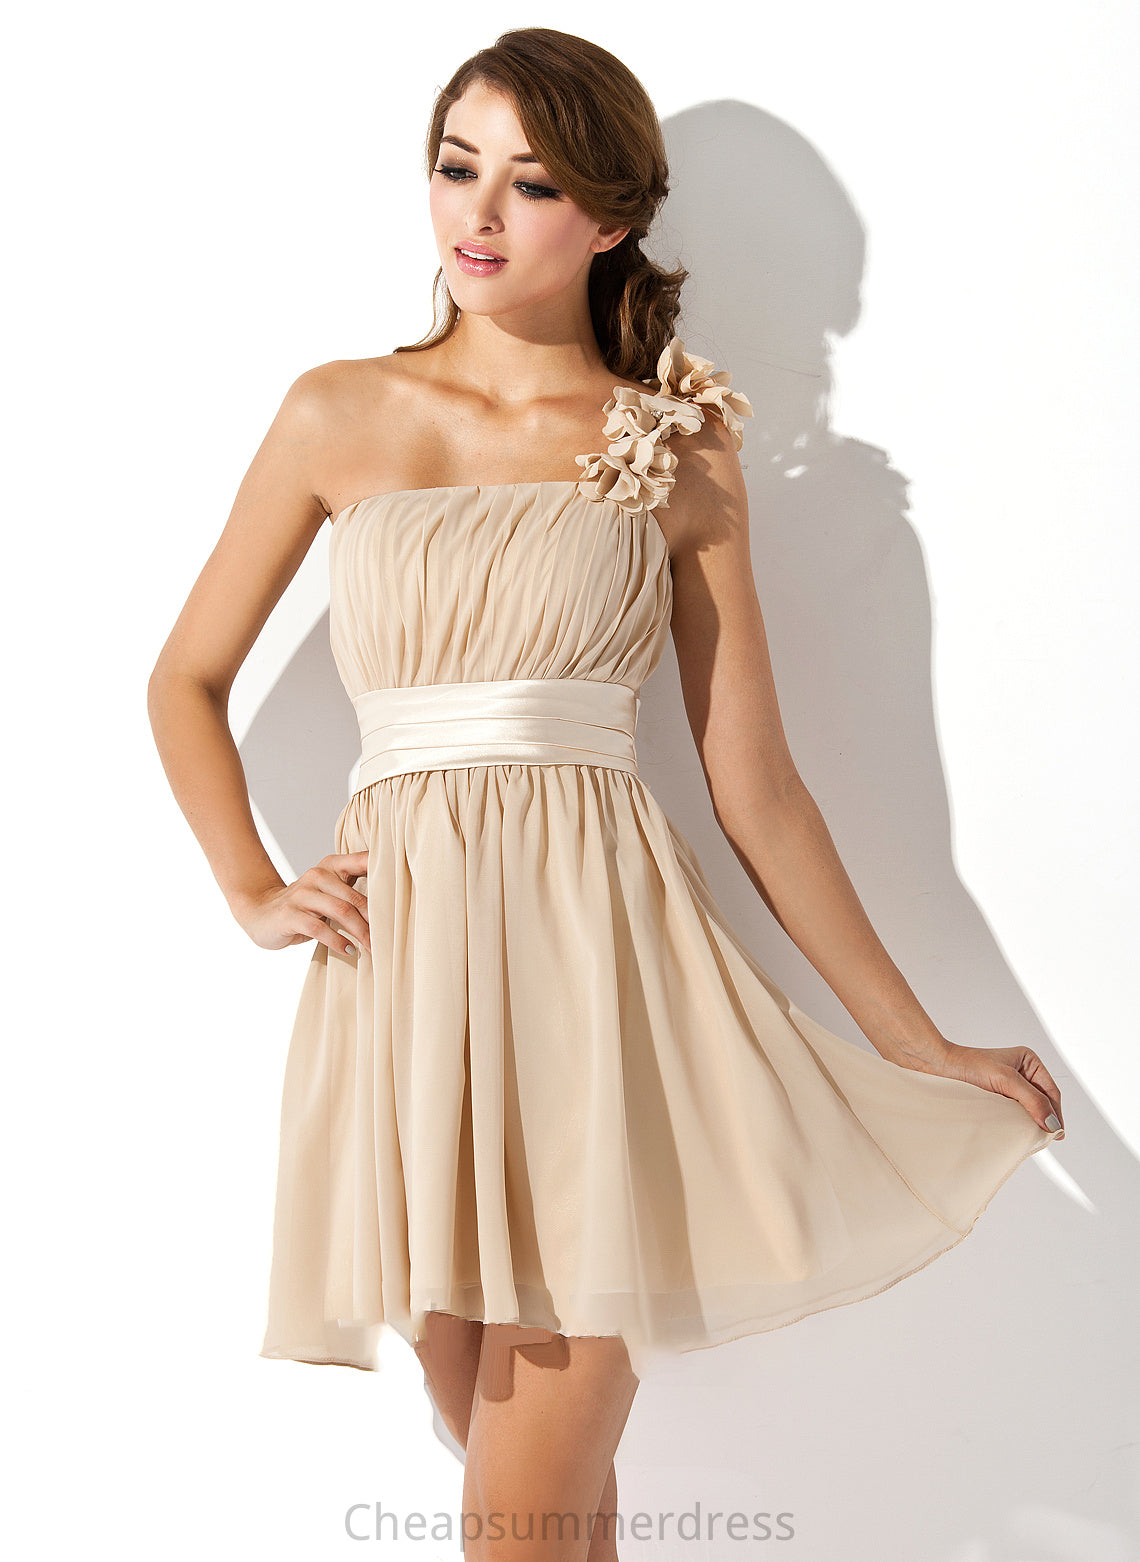 Length A-Line Fabric One-Shoulder Flower(s) Ruffle Embellishment Neckline Bow(s) Silhouette Short/Mini Anabel